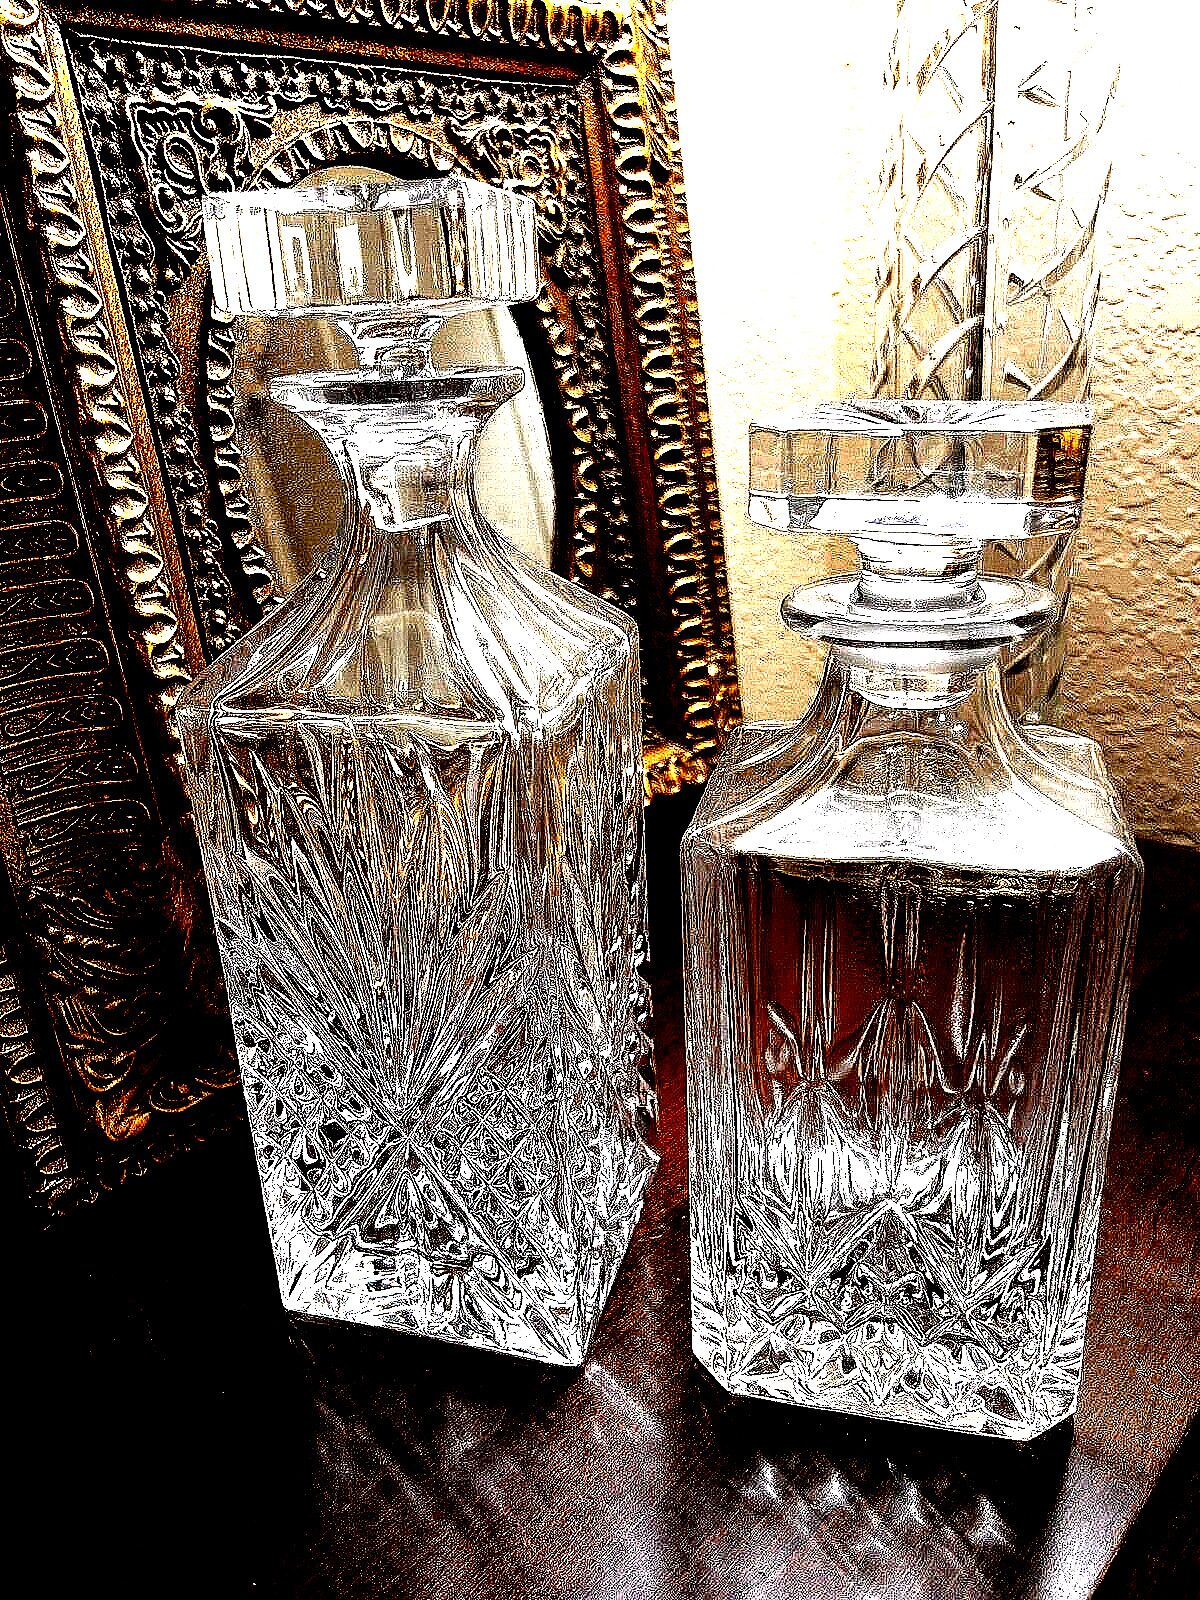 2 VINTAGE LEAD CRYSTAL DECANTERS W/ORIGINAL STOPPERS- TOWLE- BEAUTIFUL DESIGN